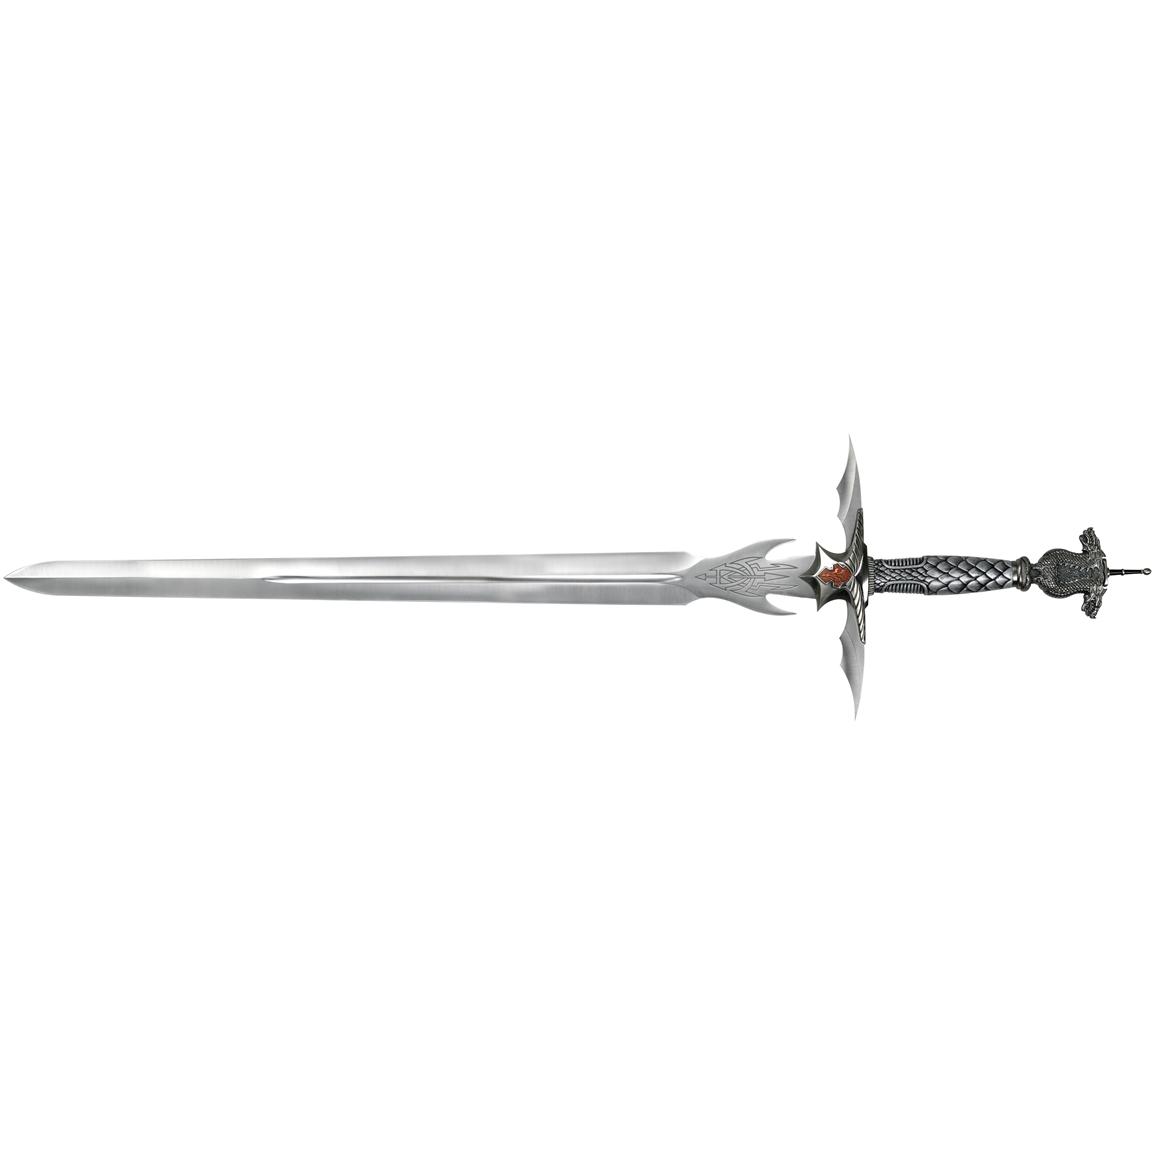 Master Cutlery® 42 inch Dragon Sword with Plaque